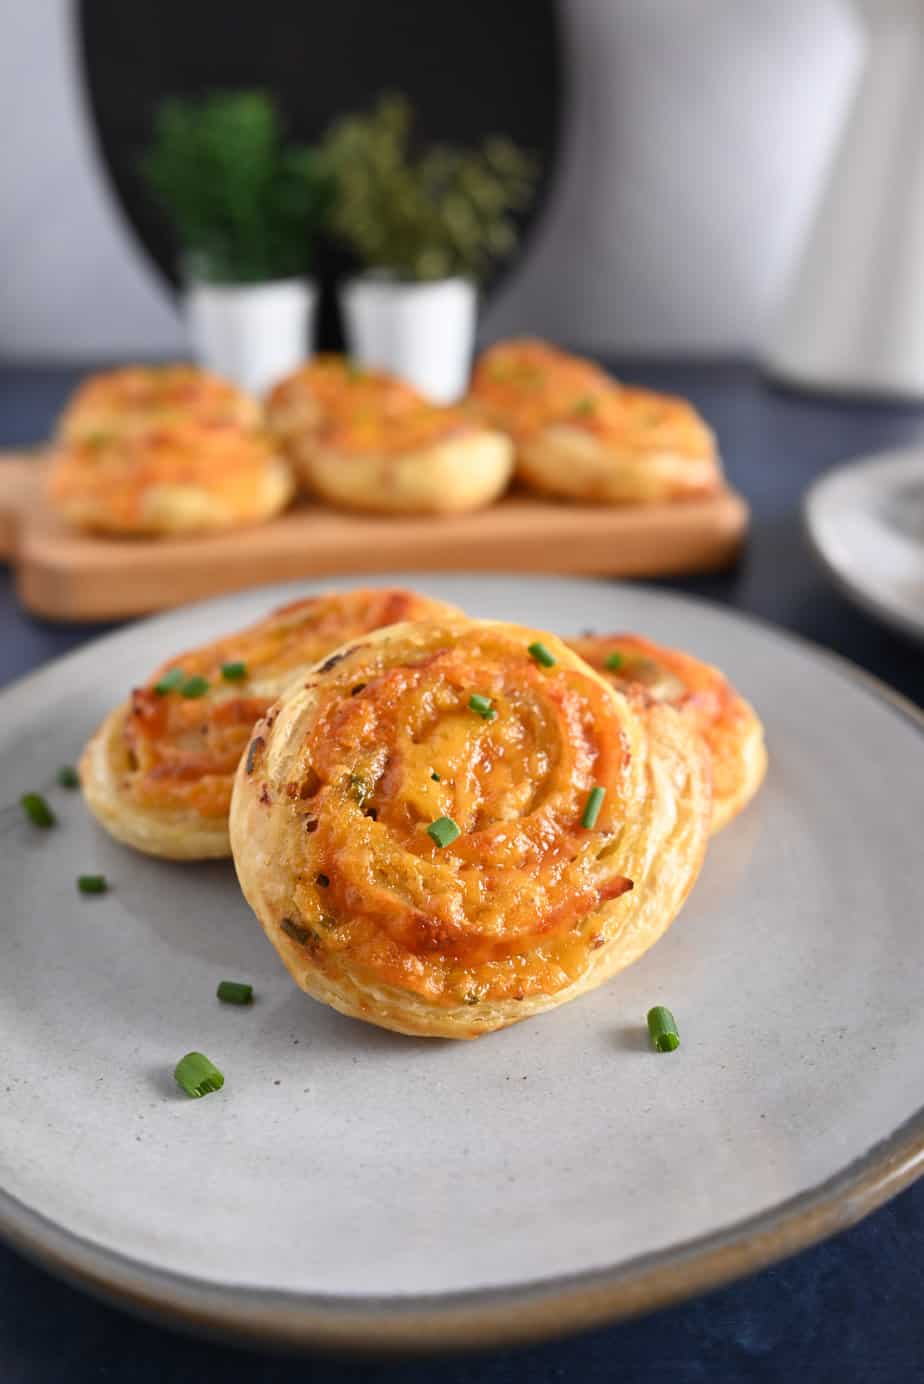 Three hot ham and cheese pinwheels on a gray plate with a platter of more pinwheels in the background.